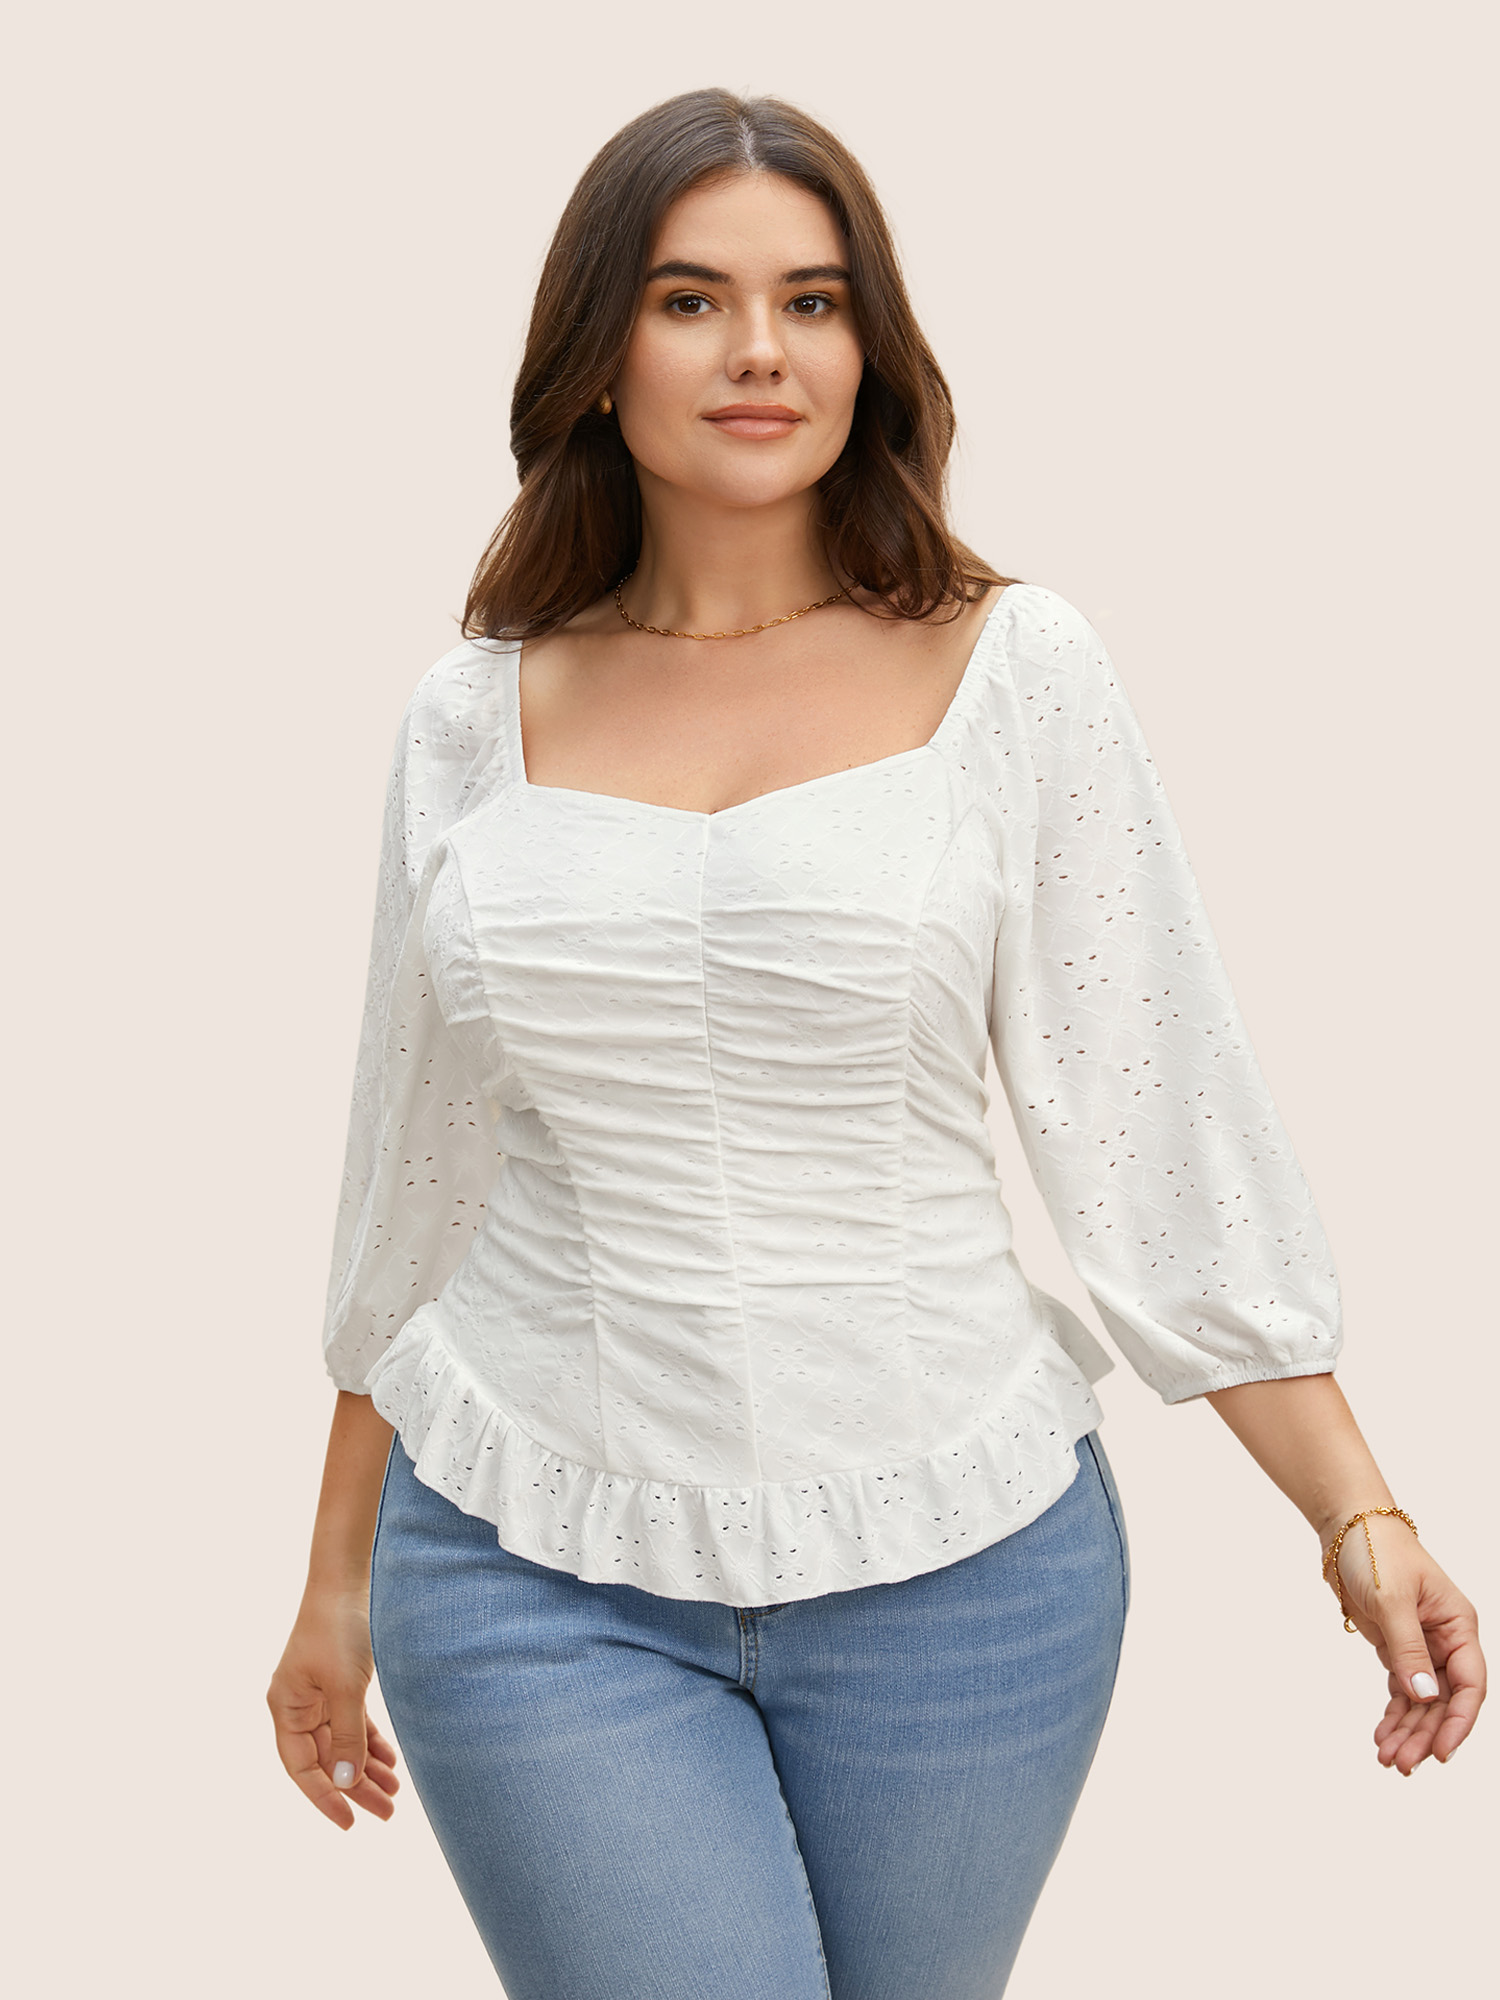 

Plus Size Ivory Broderie Anglaise Ruched Lantern Sleeve Blouse Women Elegant Elbow-length sleeve Heart neckline Everyday Blouses BloomChic